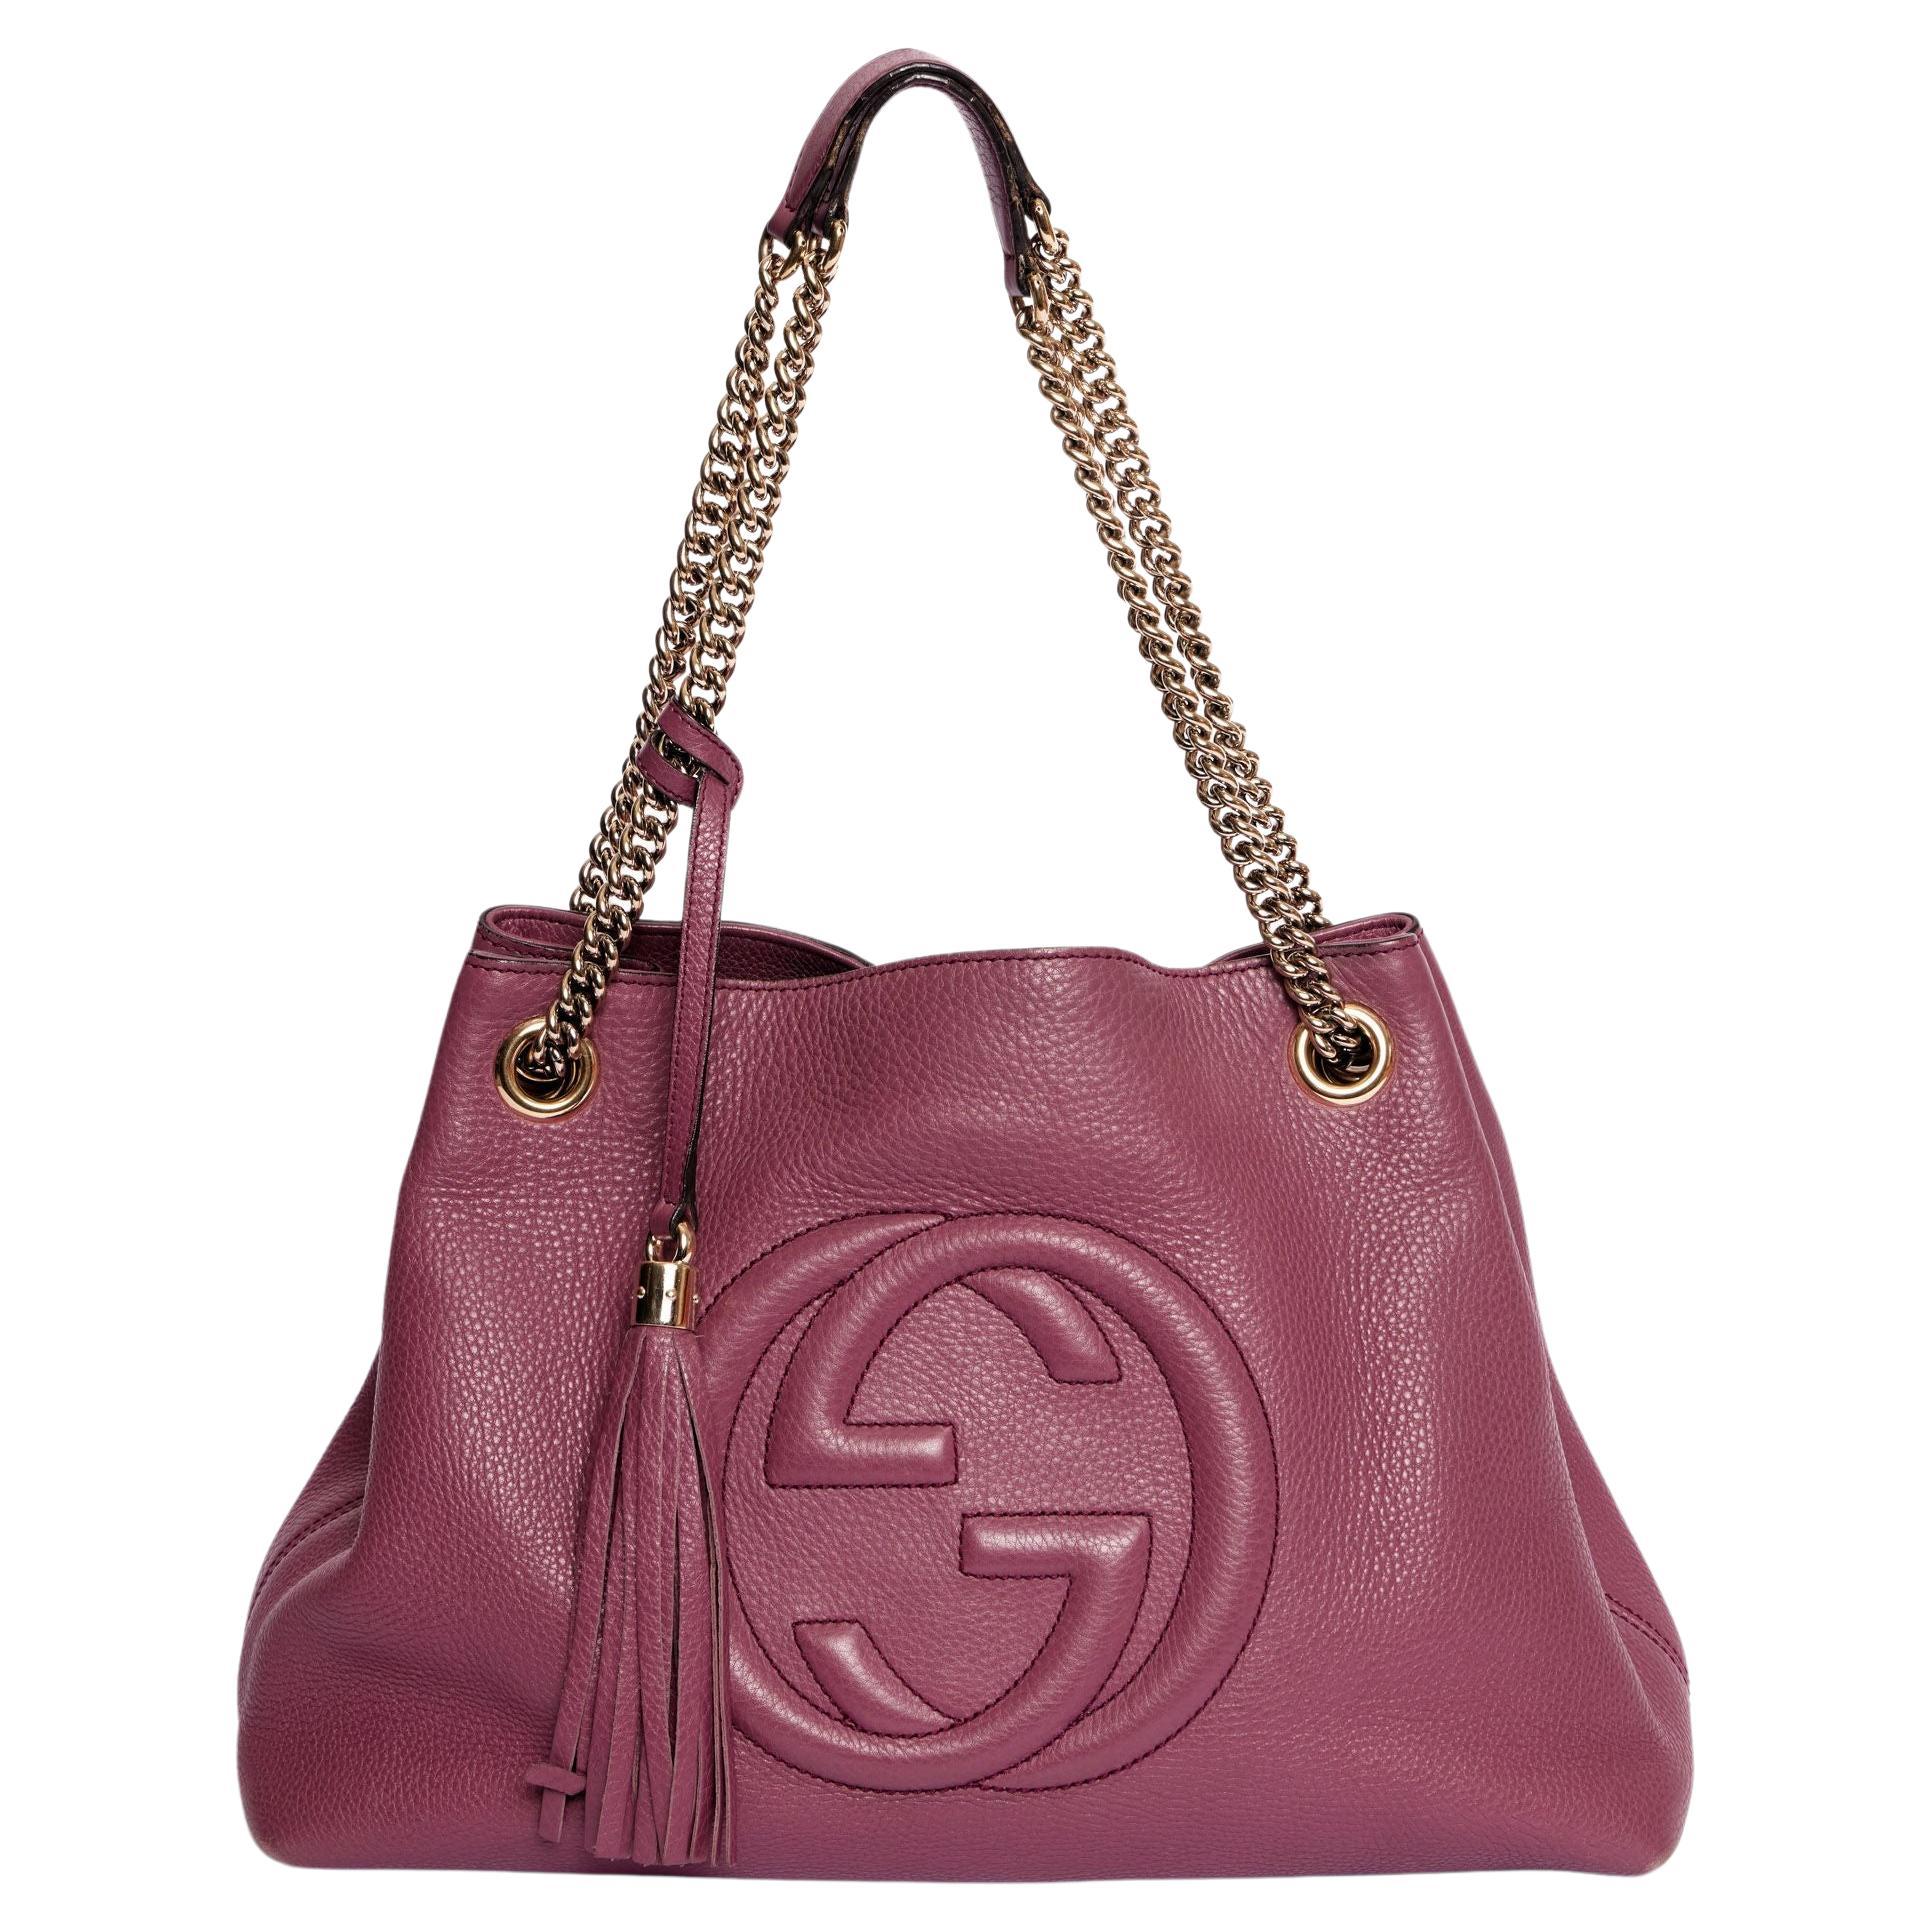 Gucci Purple Pebbled leather GG Bag